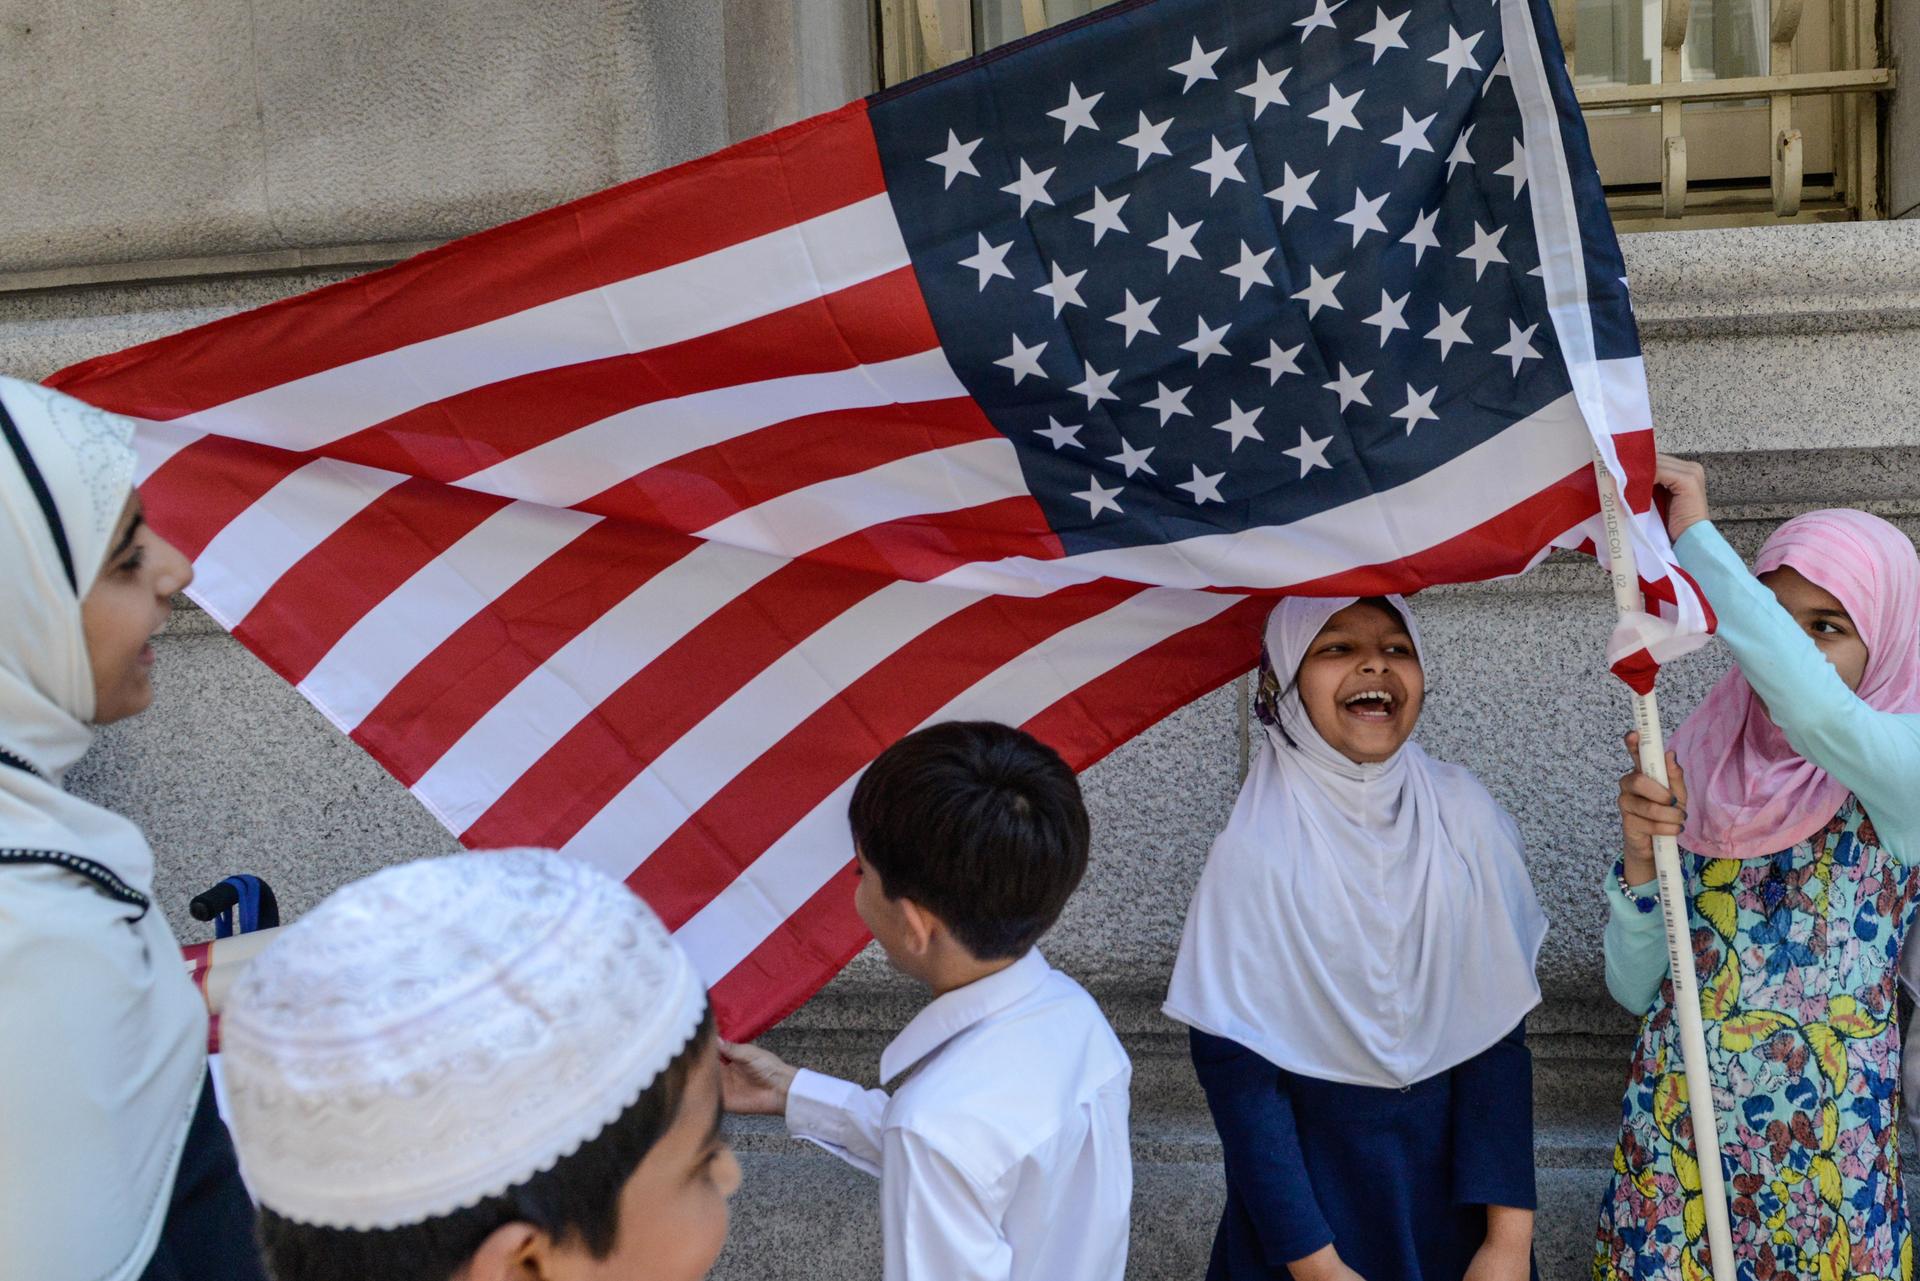 Children play near an American flag during the annual Muslim Day Parade in New York City.